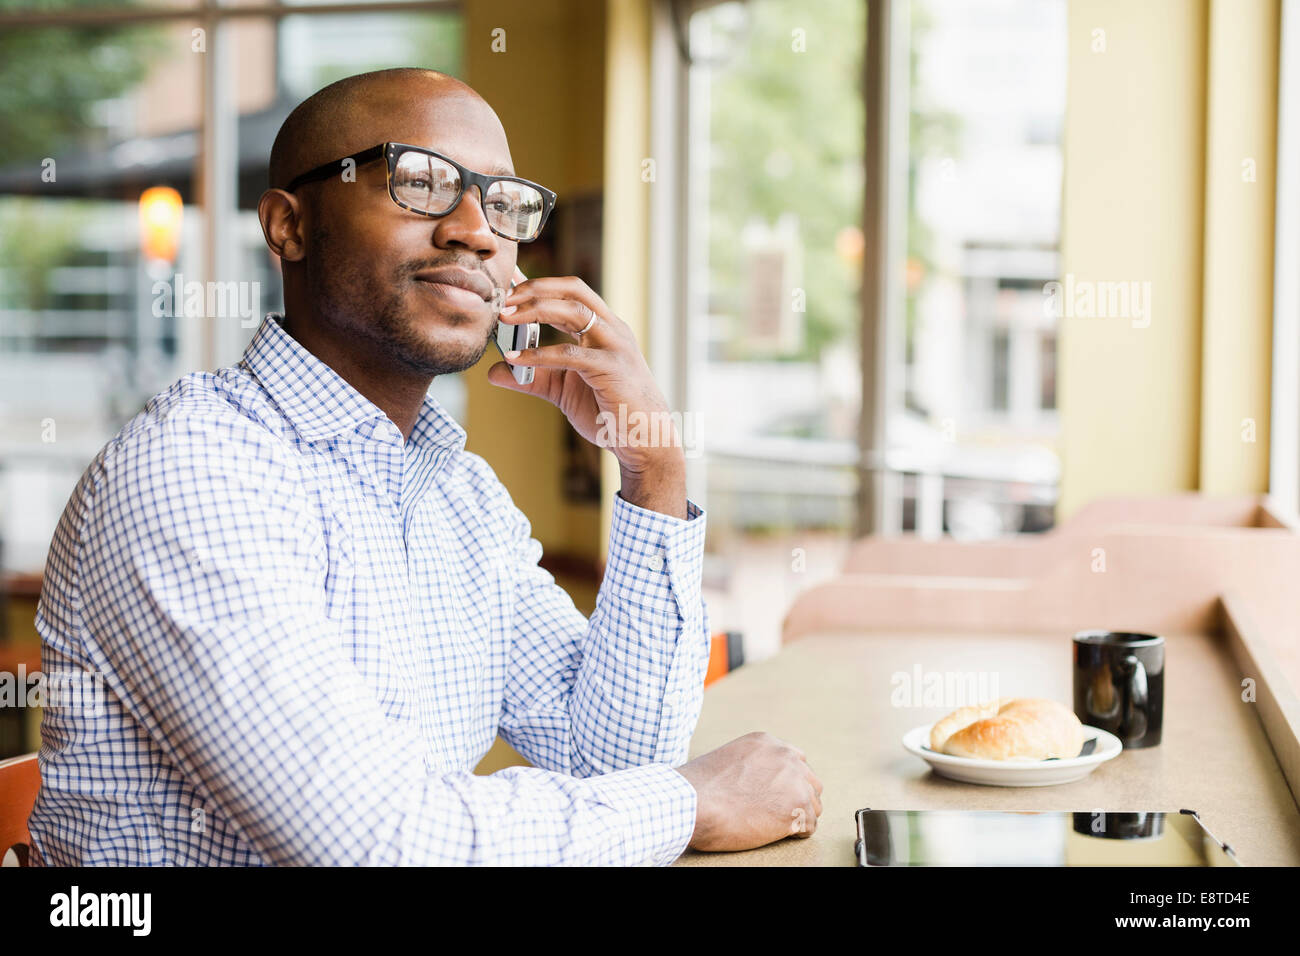 Black man talking on cell phone in coffee shop Banque D'Images